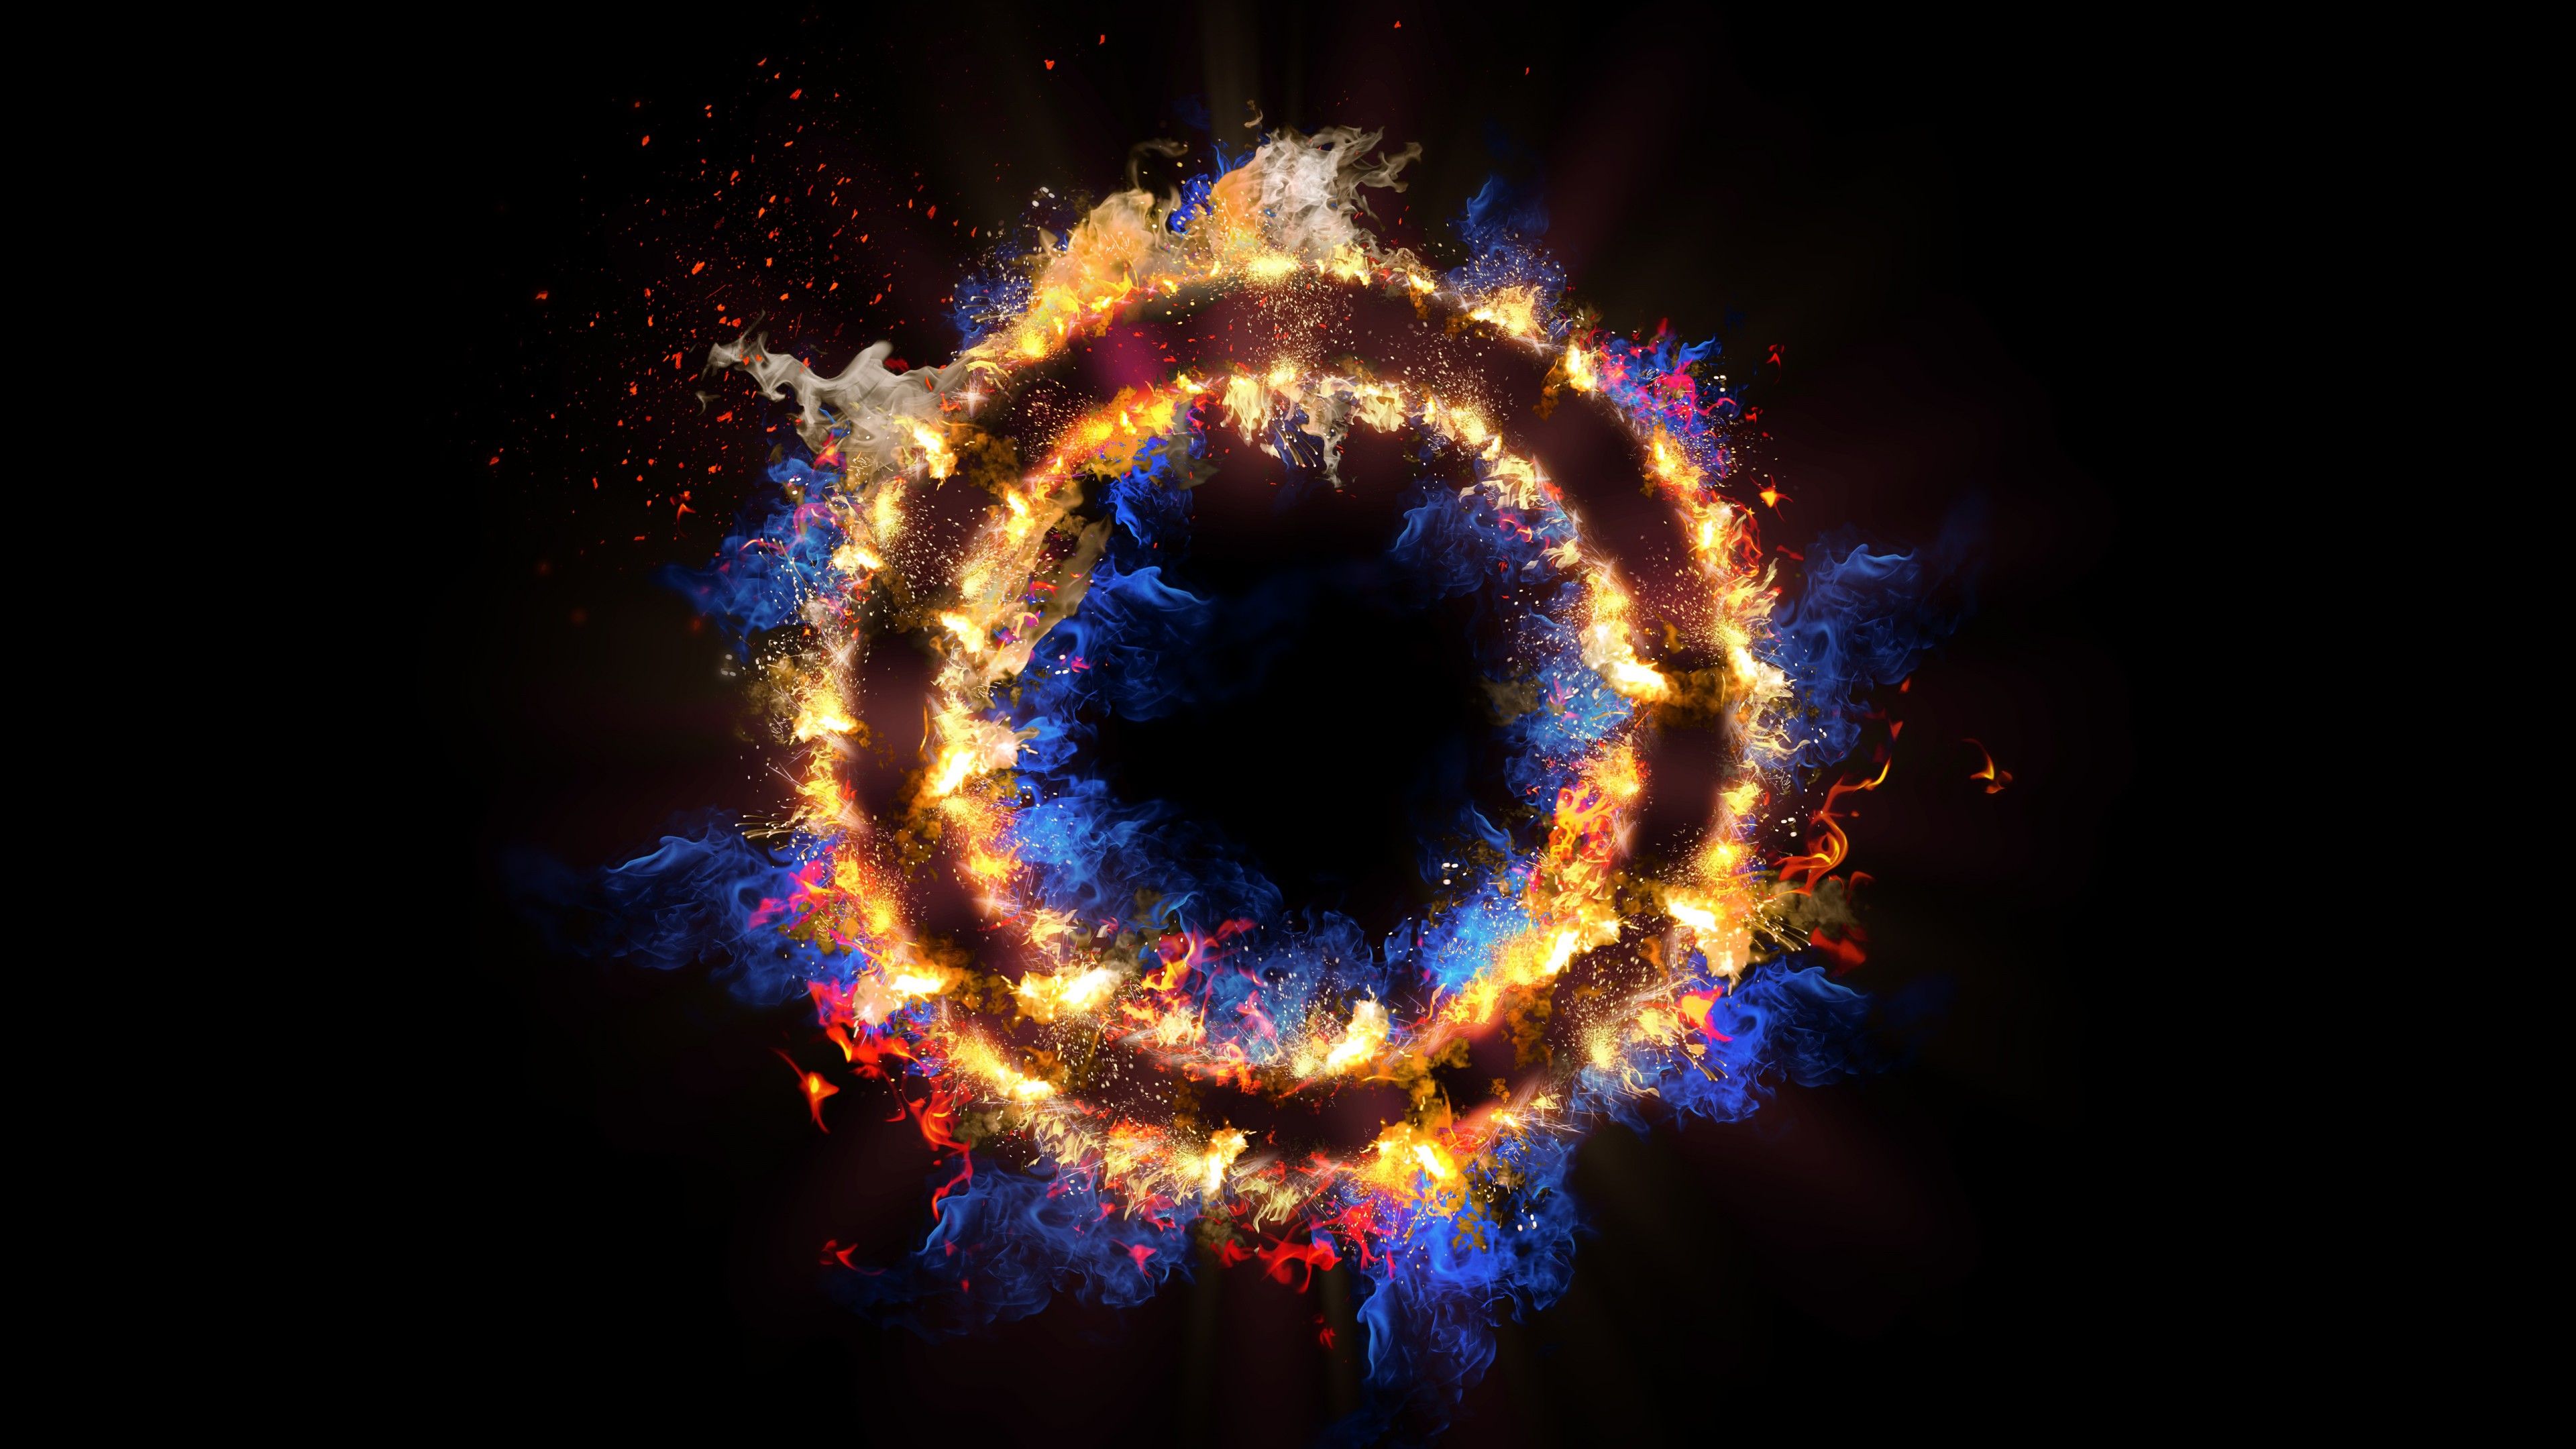 Fire ring 4K Wallpaper, Energy, Black background, Flames, Circle, 5K, Abstract